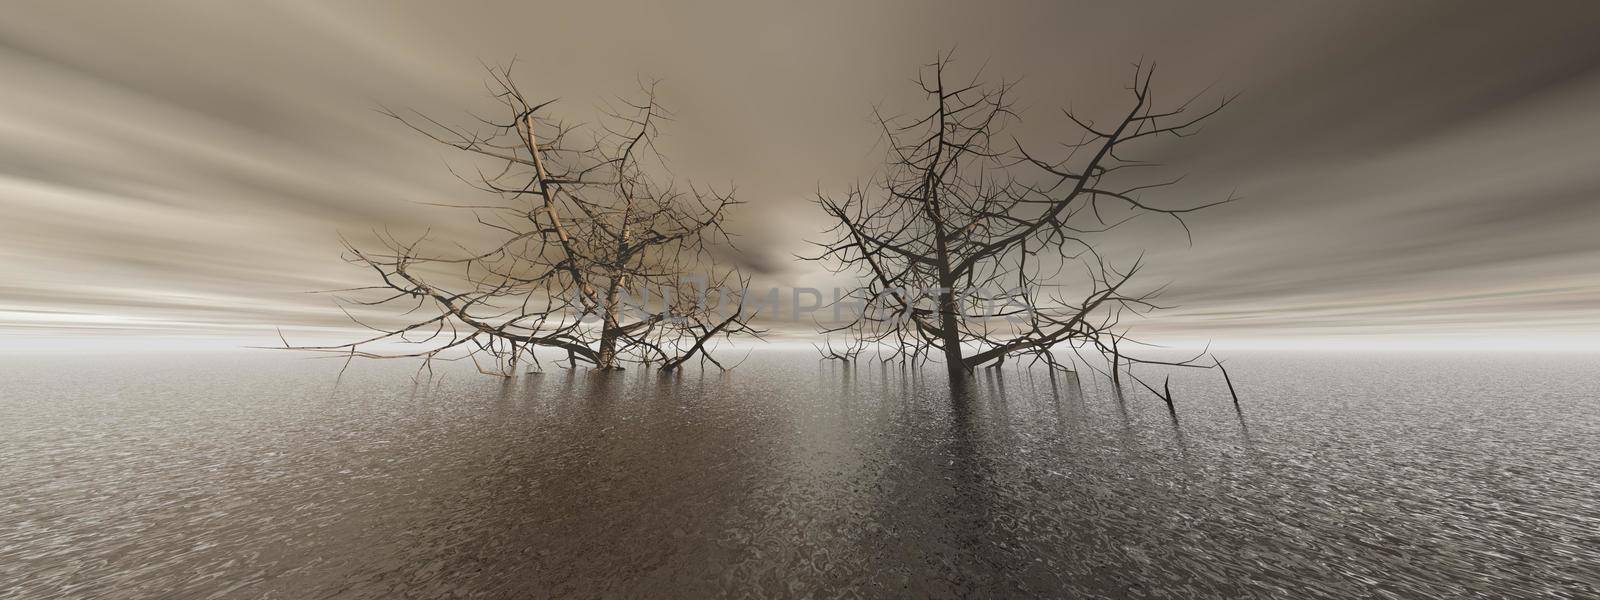 beautiful ocean view with two large trees - 3d rendering by mariephotos